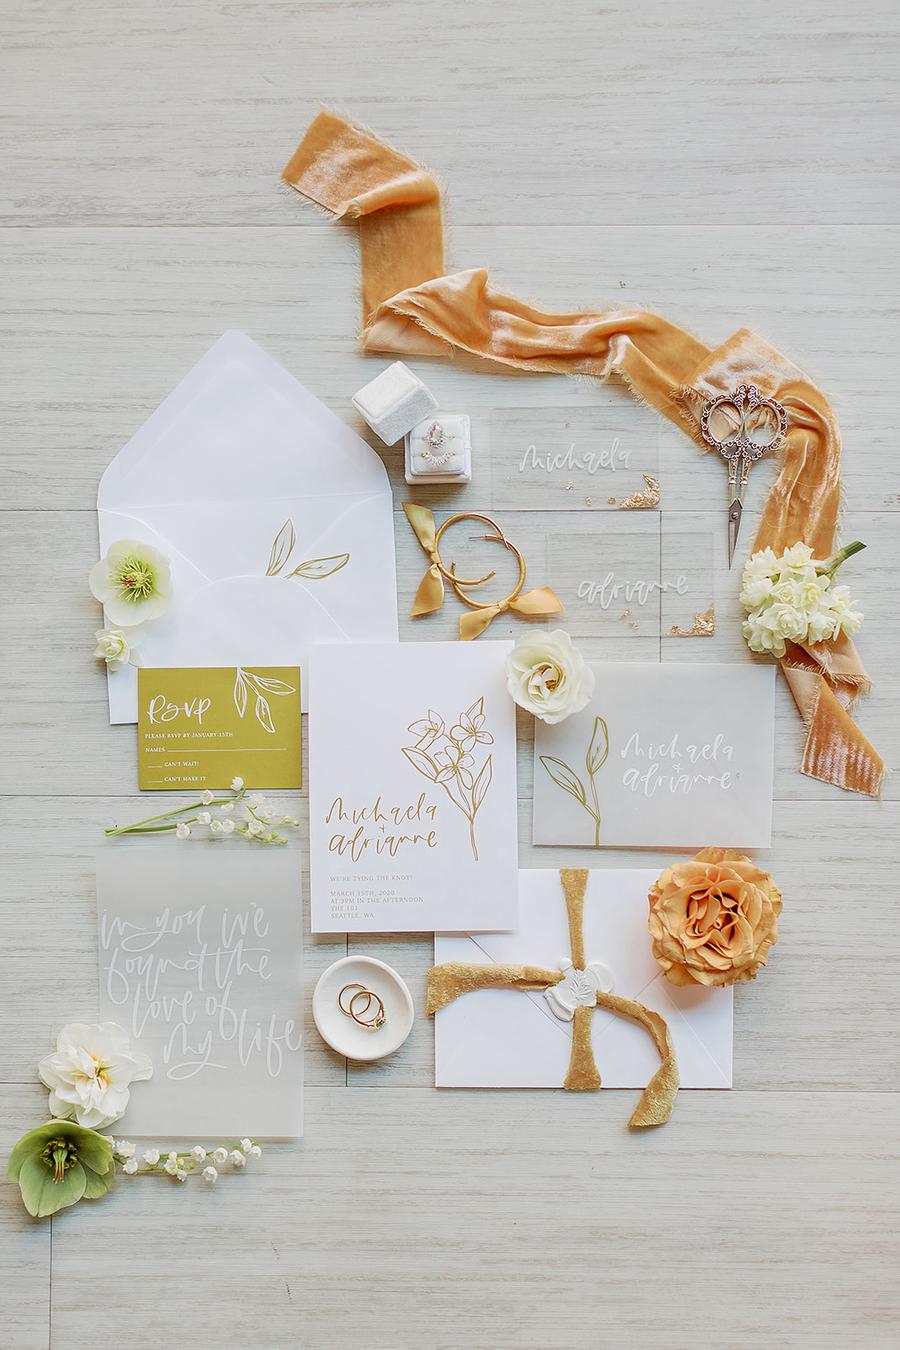 The wedding stationery was done with mustard and rust touches, with floral and gold leaf touches